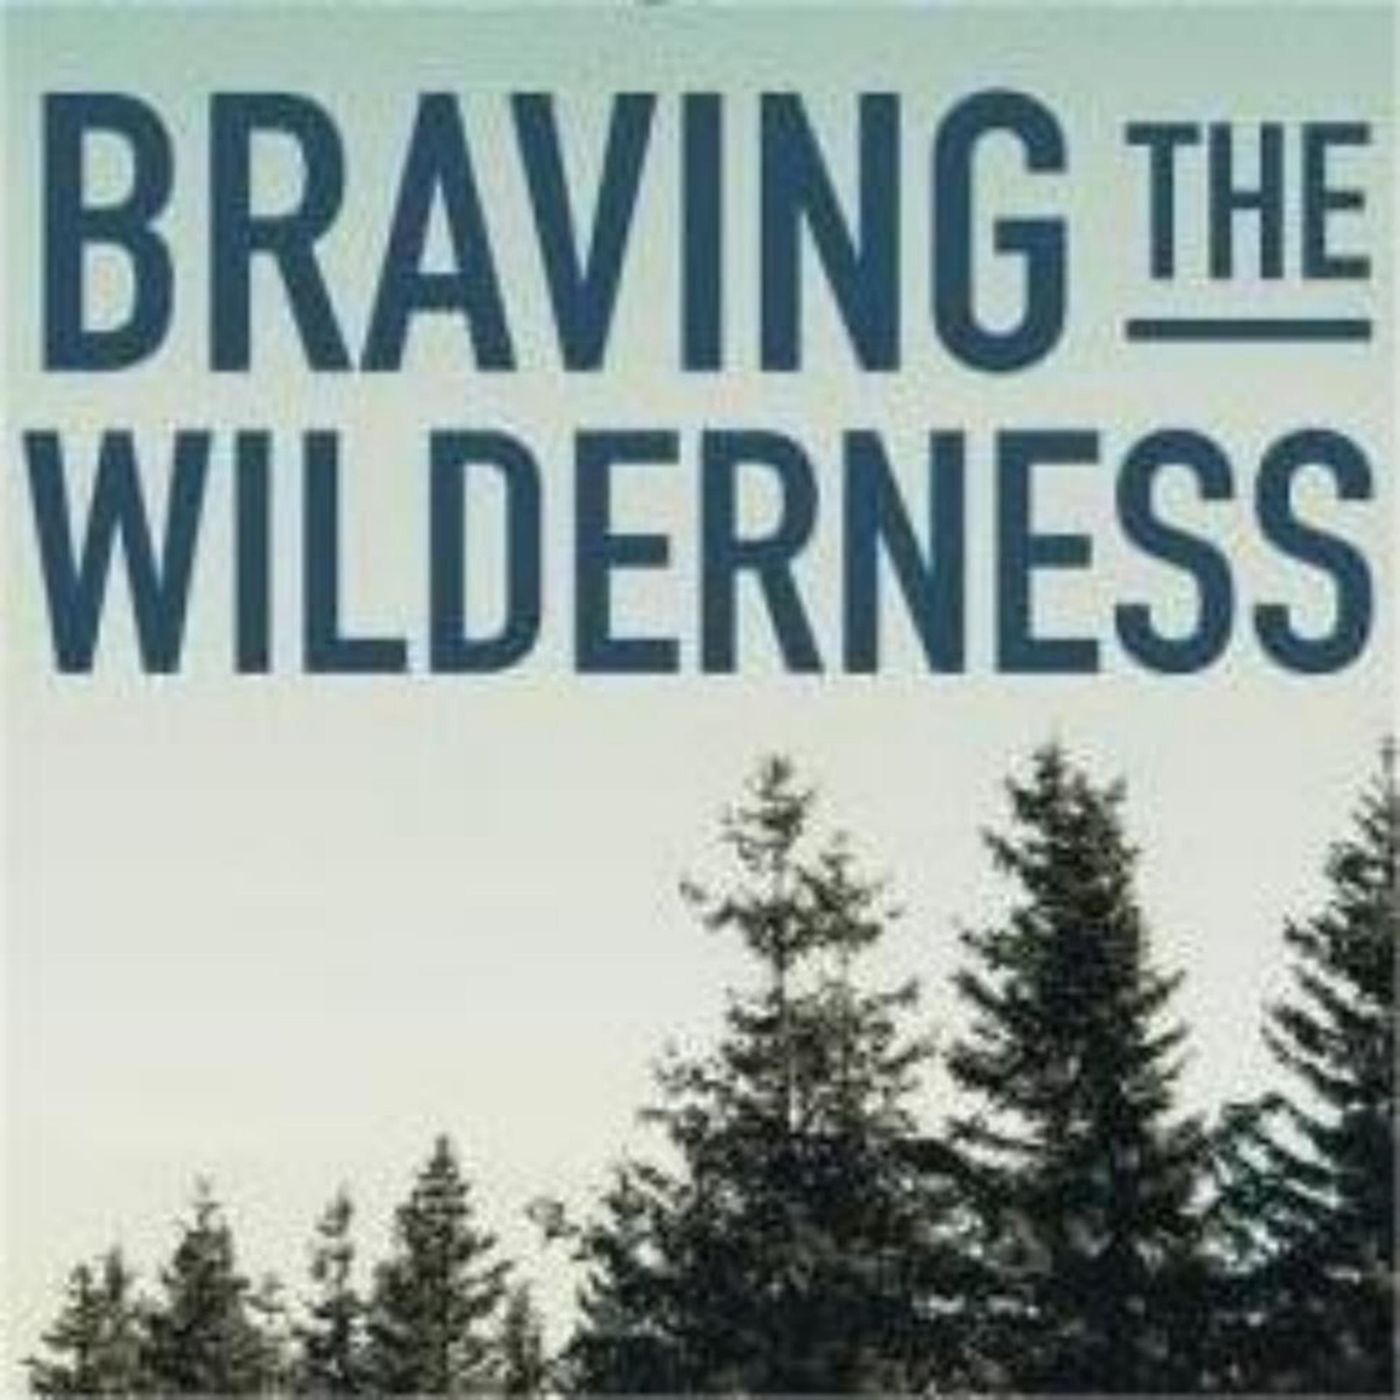 Finding Connection in the Wilderness: Exploring Brené Brown's Journey